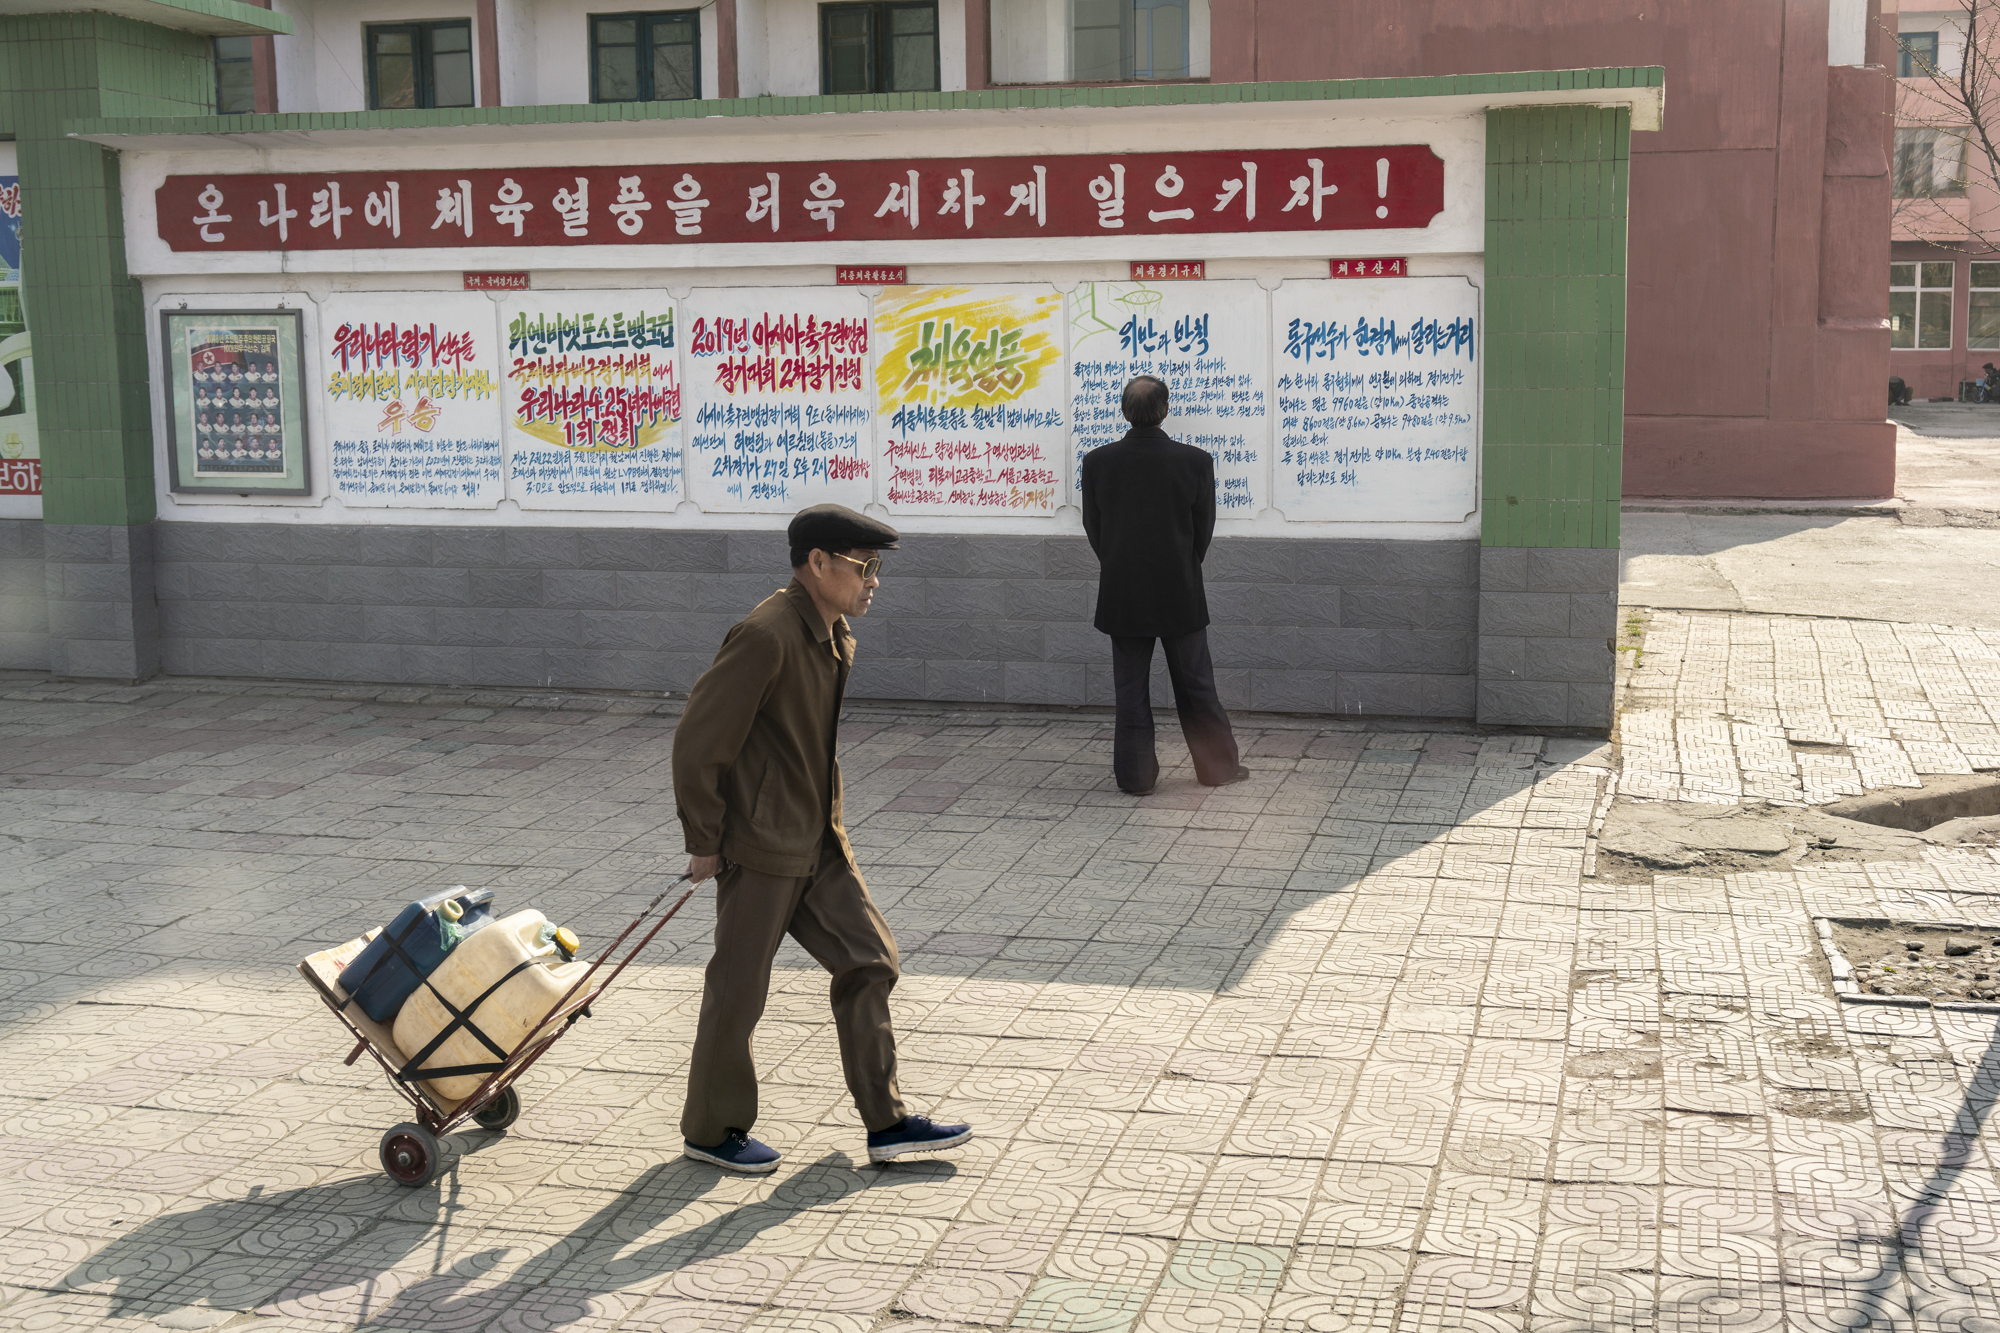  A man is reading propaganda messages on a wall in a Pyongyang neighbourhood.  All propaganda messages are produced following the guidelines set by the Propaganda and Agitation Department (PAD) and placed throughout the whole country to encourage peo